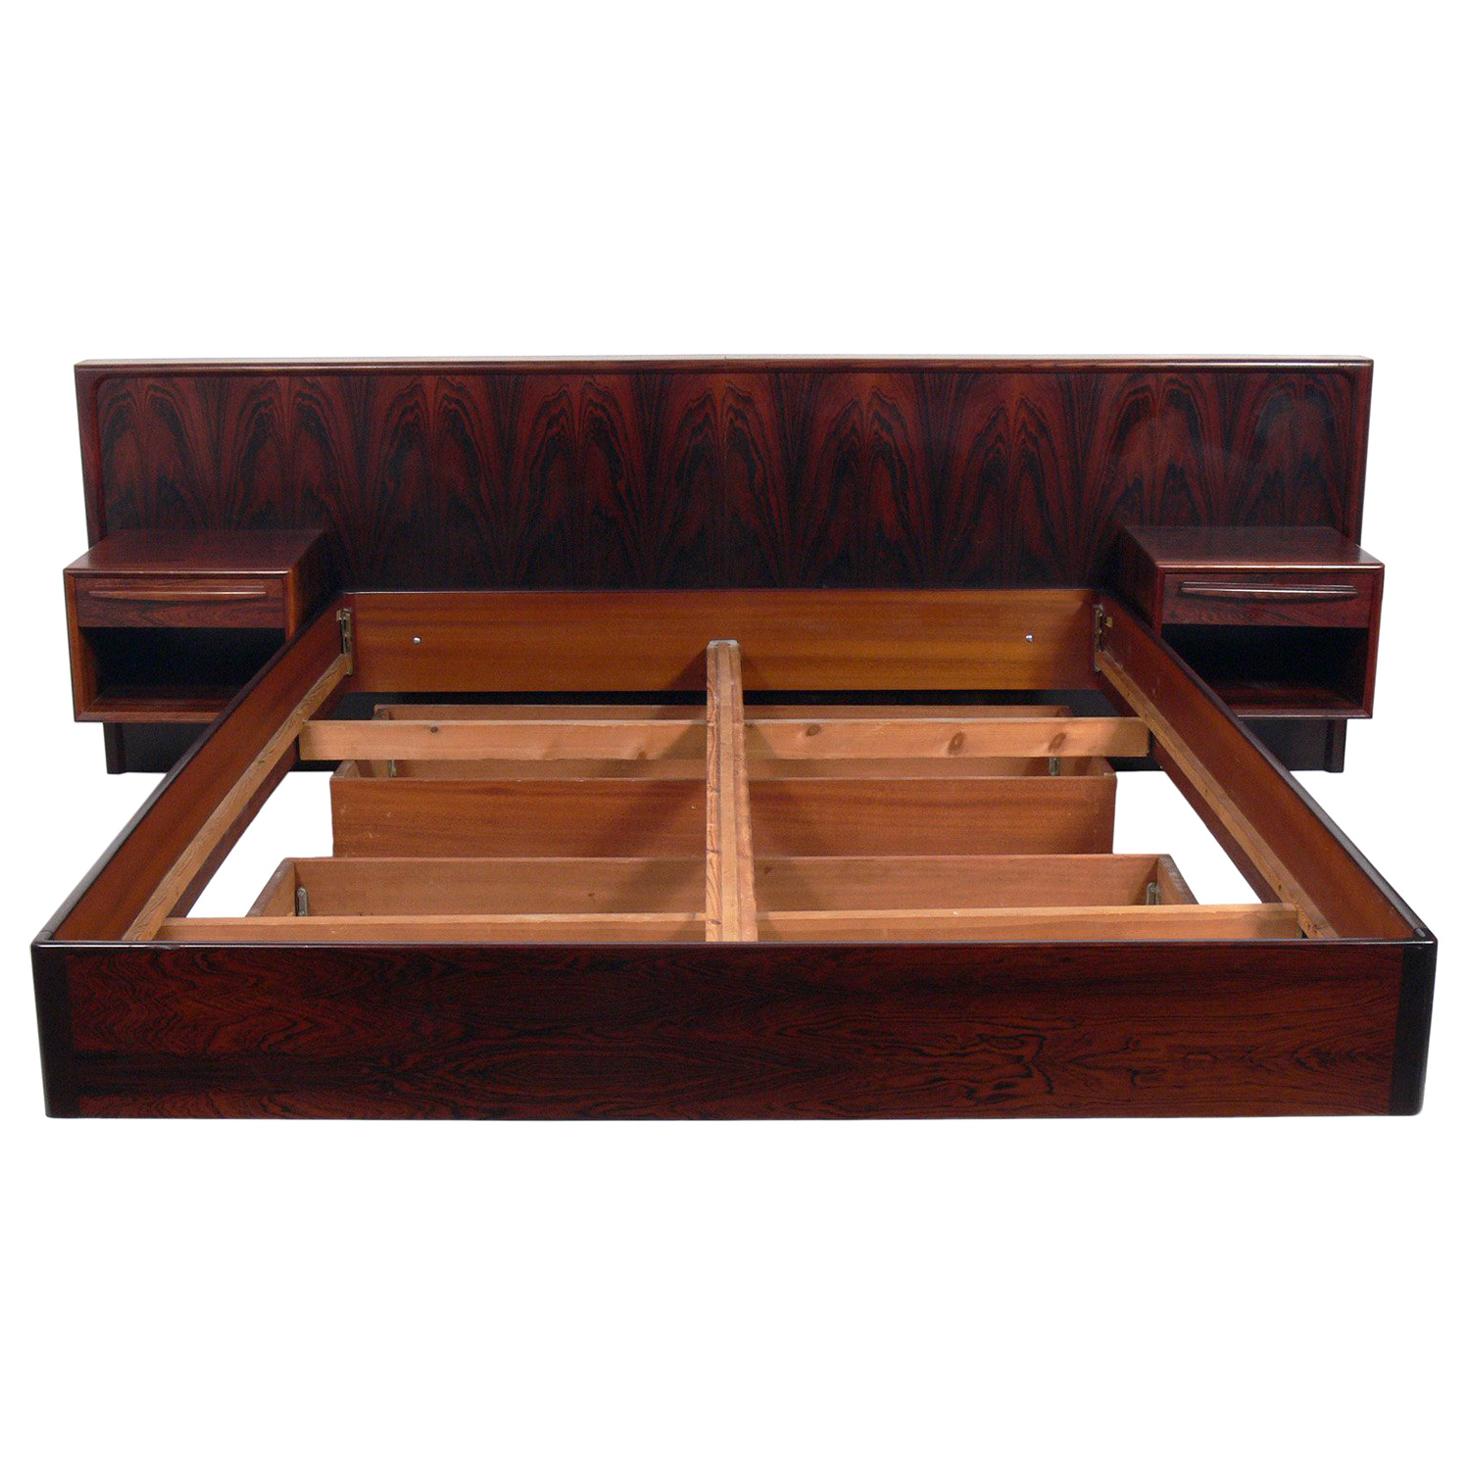 Danish Modern "Floating" Rosewood Bed with Integrated Nightstands